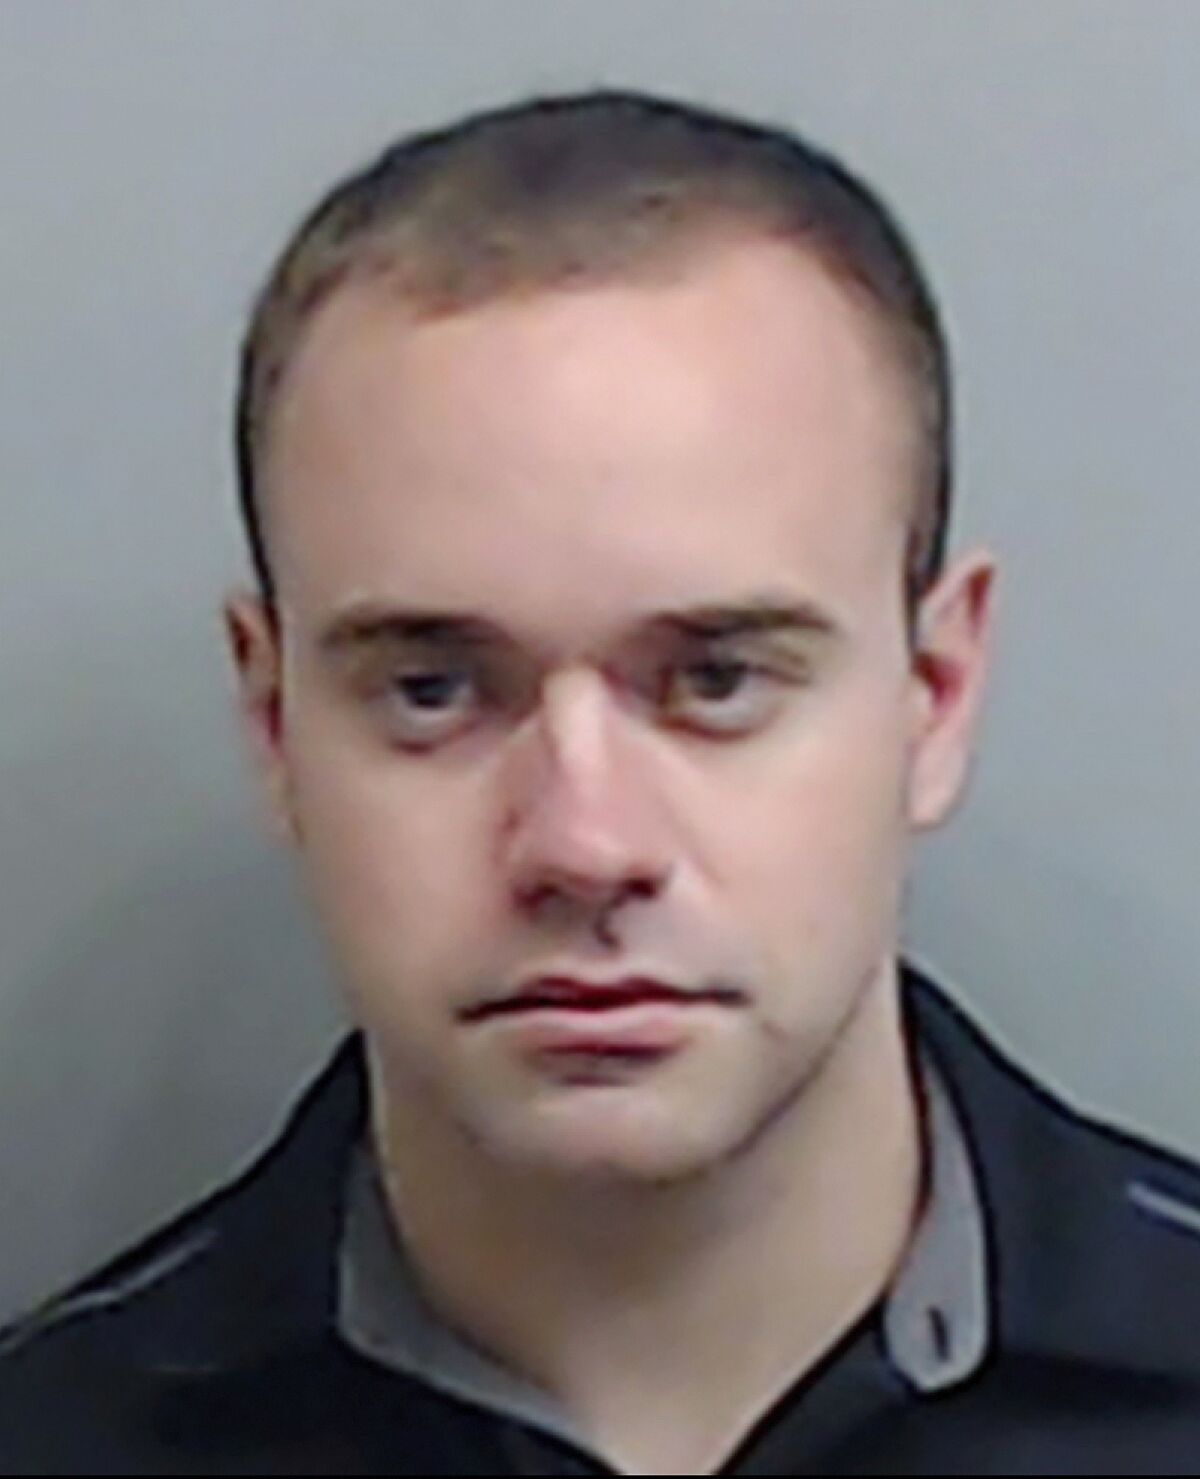 In this booking photo made available Thursday, June 18, 2020 by the Fulton County, Ga., Sheriff's Office, shows Atlanta Police Officer Garrett Rolfe. Rolfe, who fatally shot Rayshard Brooks in the back after the fleeing man pointed a stun gun in his direction, was charged with felony murder and 10 other charges. Rolfe was fired after the shooting. (Fulton County Sheriff's Office via AP)